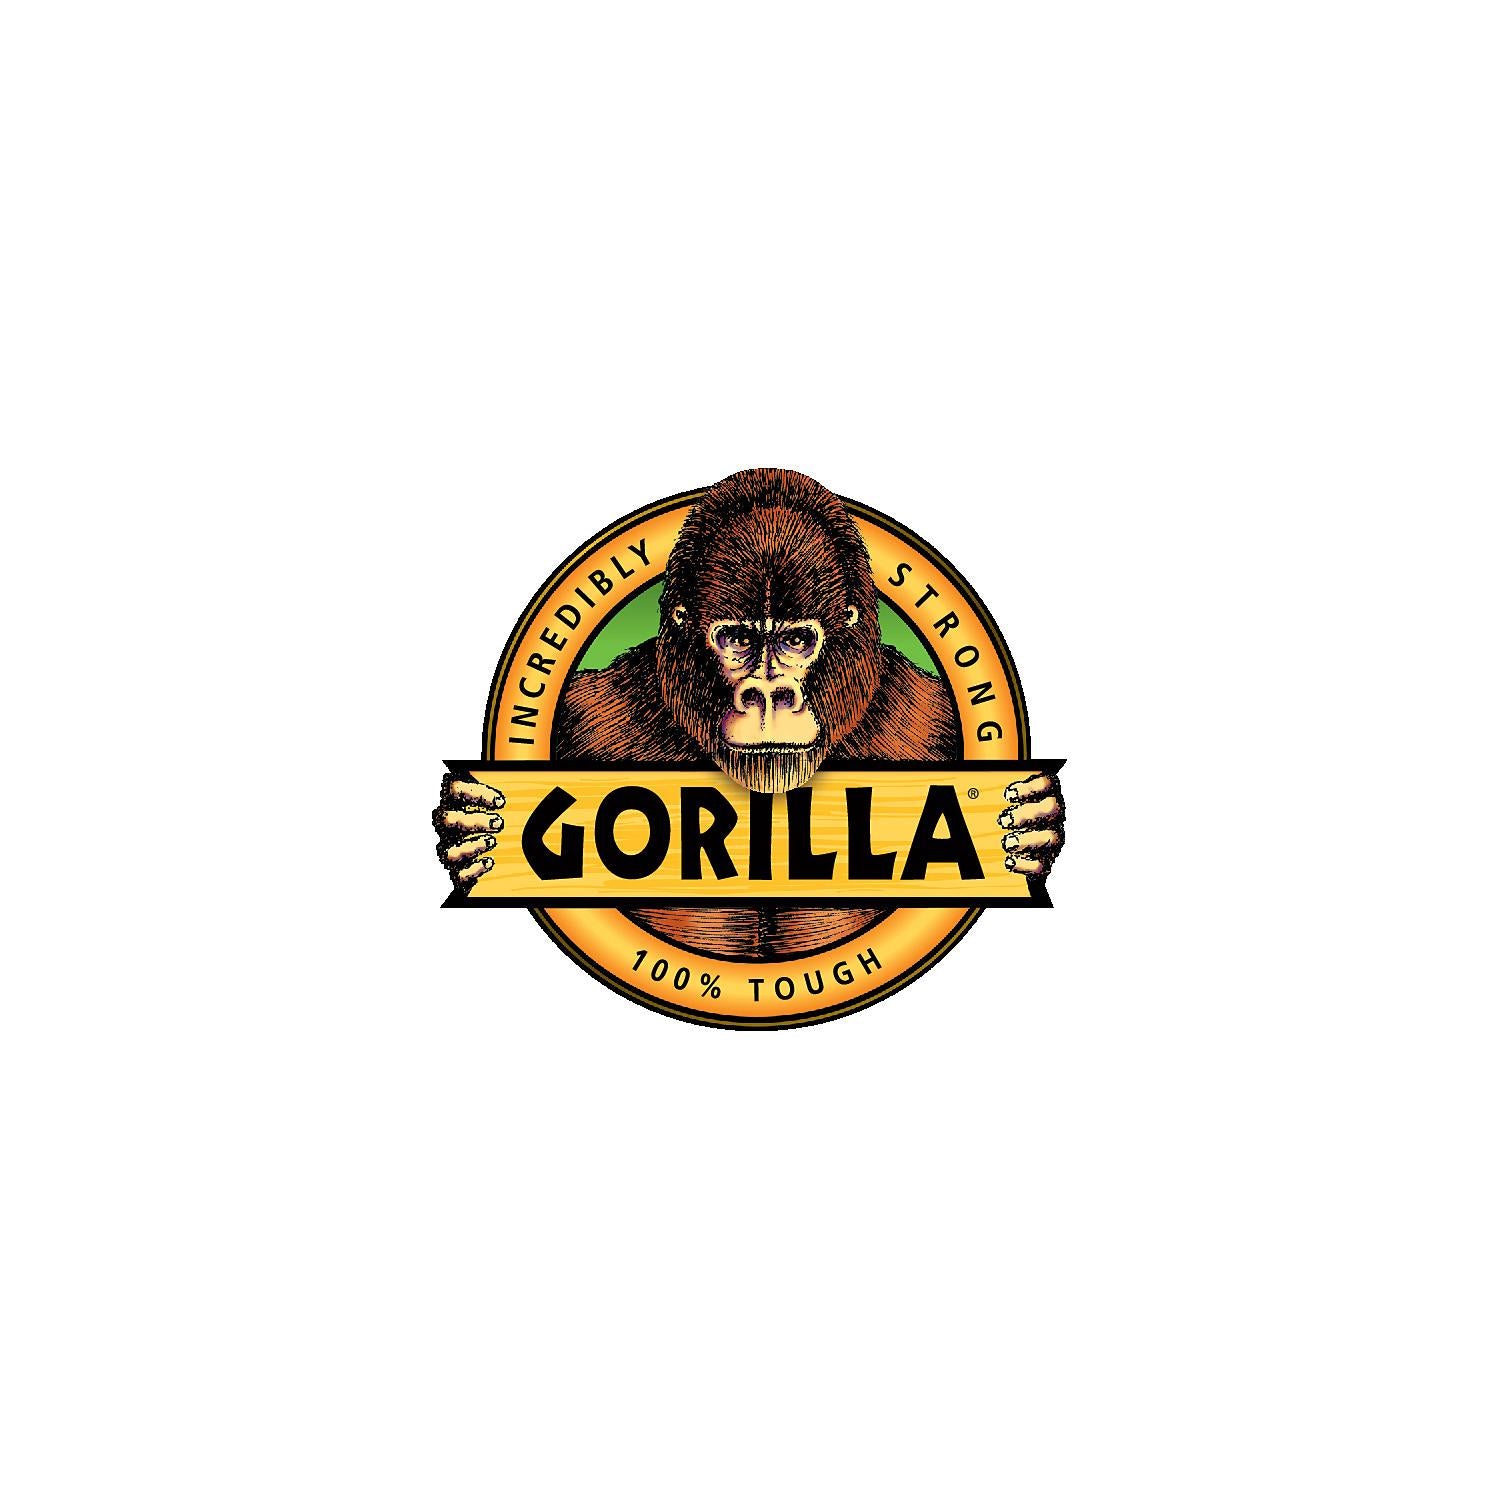 Gorilla Clear Grip, Gorilla Clear Grip is a flexible, fast-setting,  crystal clear contact adhesive that creates a strong, permanent bond. Gorilla  Clear Grip is paintable and